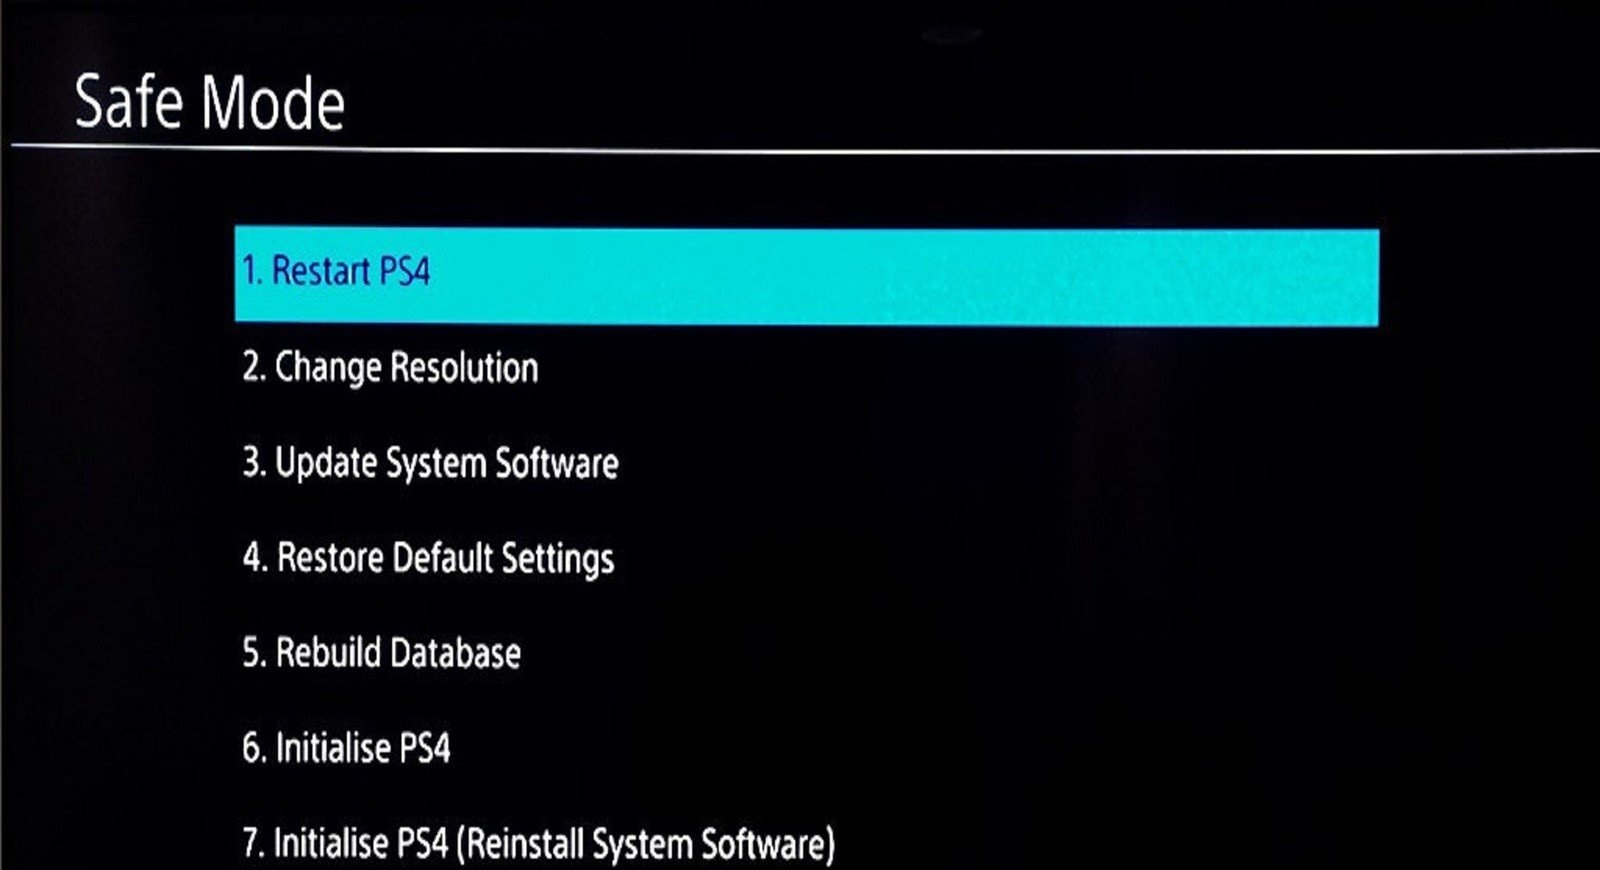 PS4 stuck in safe mode